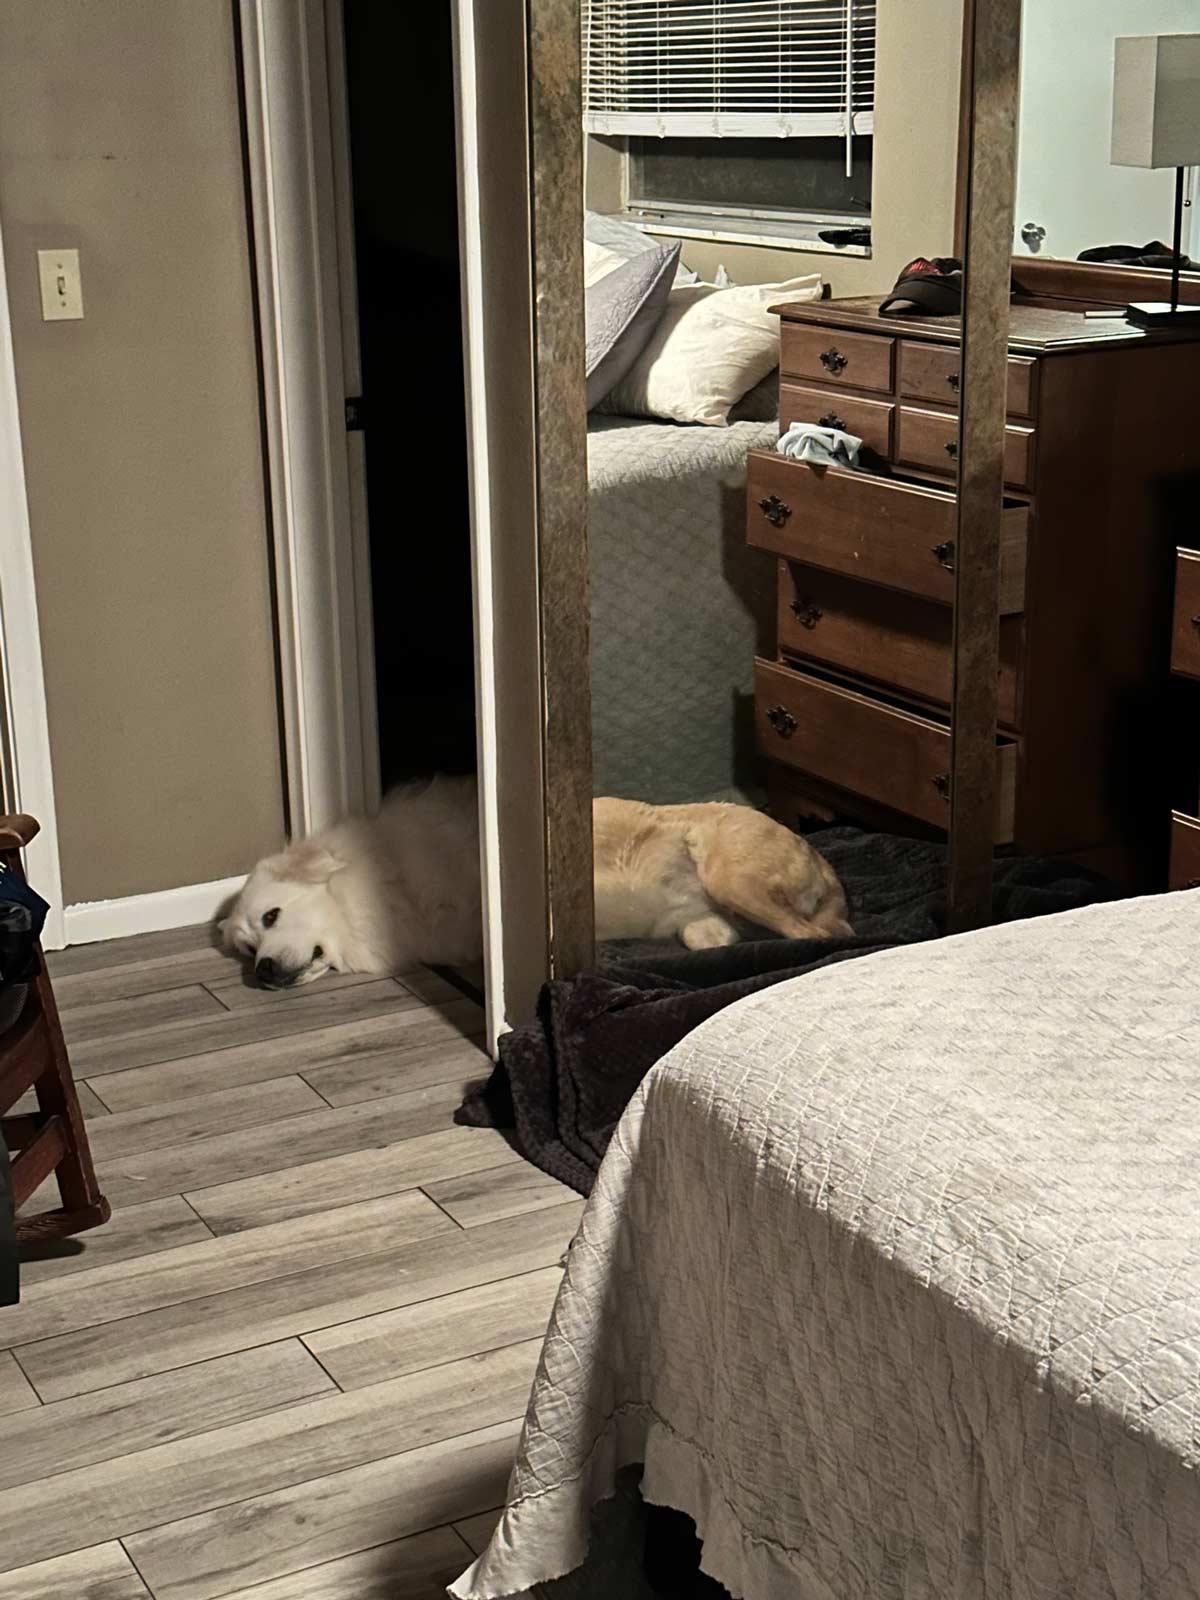 My sister’s dogs were sleeping, one inside the bathroom, one next to the bed, the reflection made it look like one dog